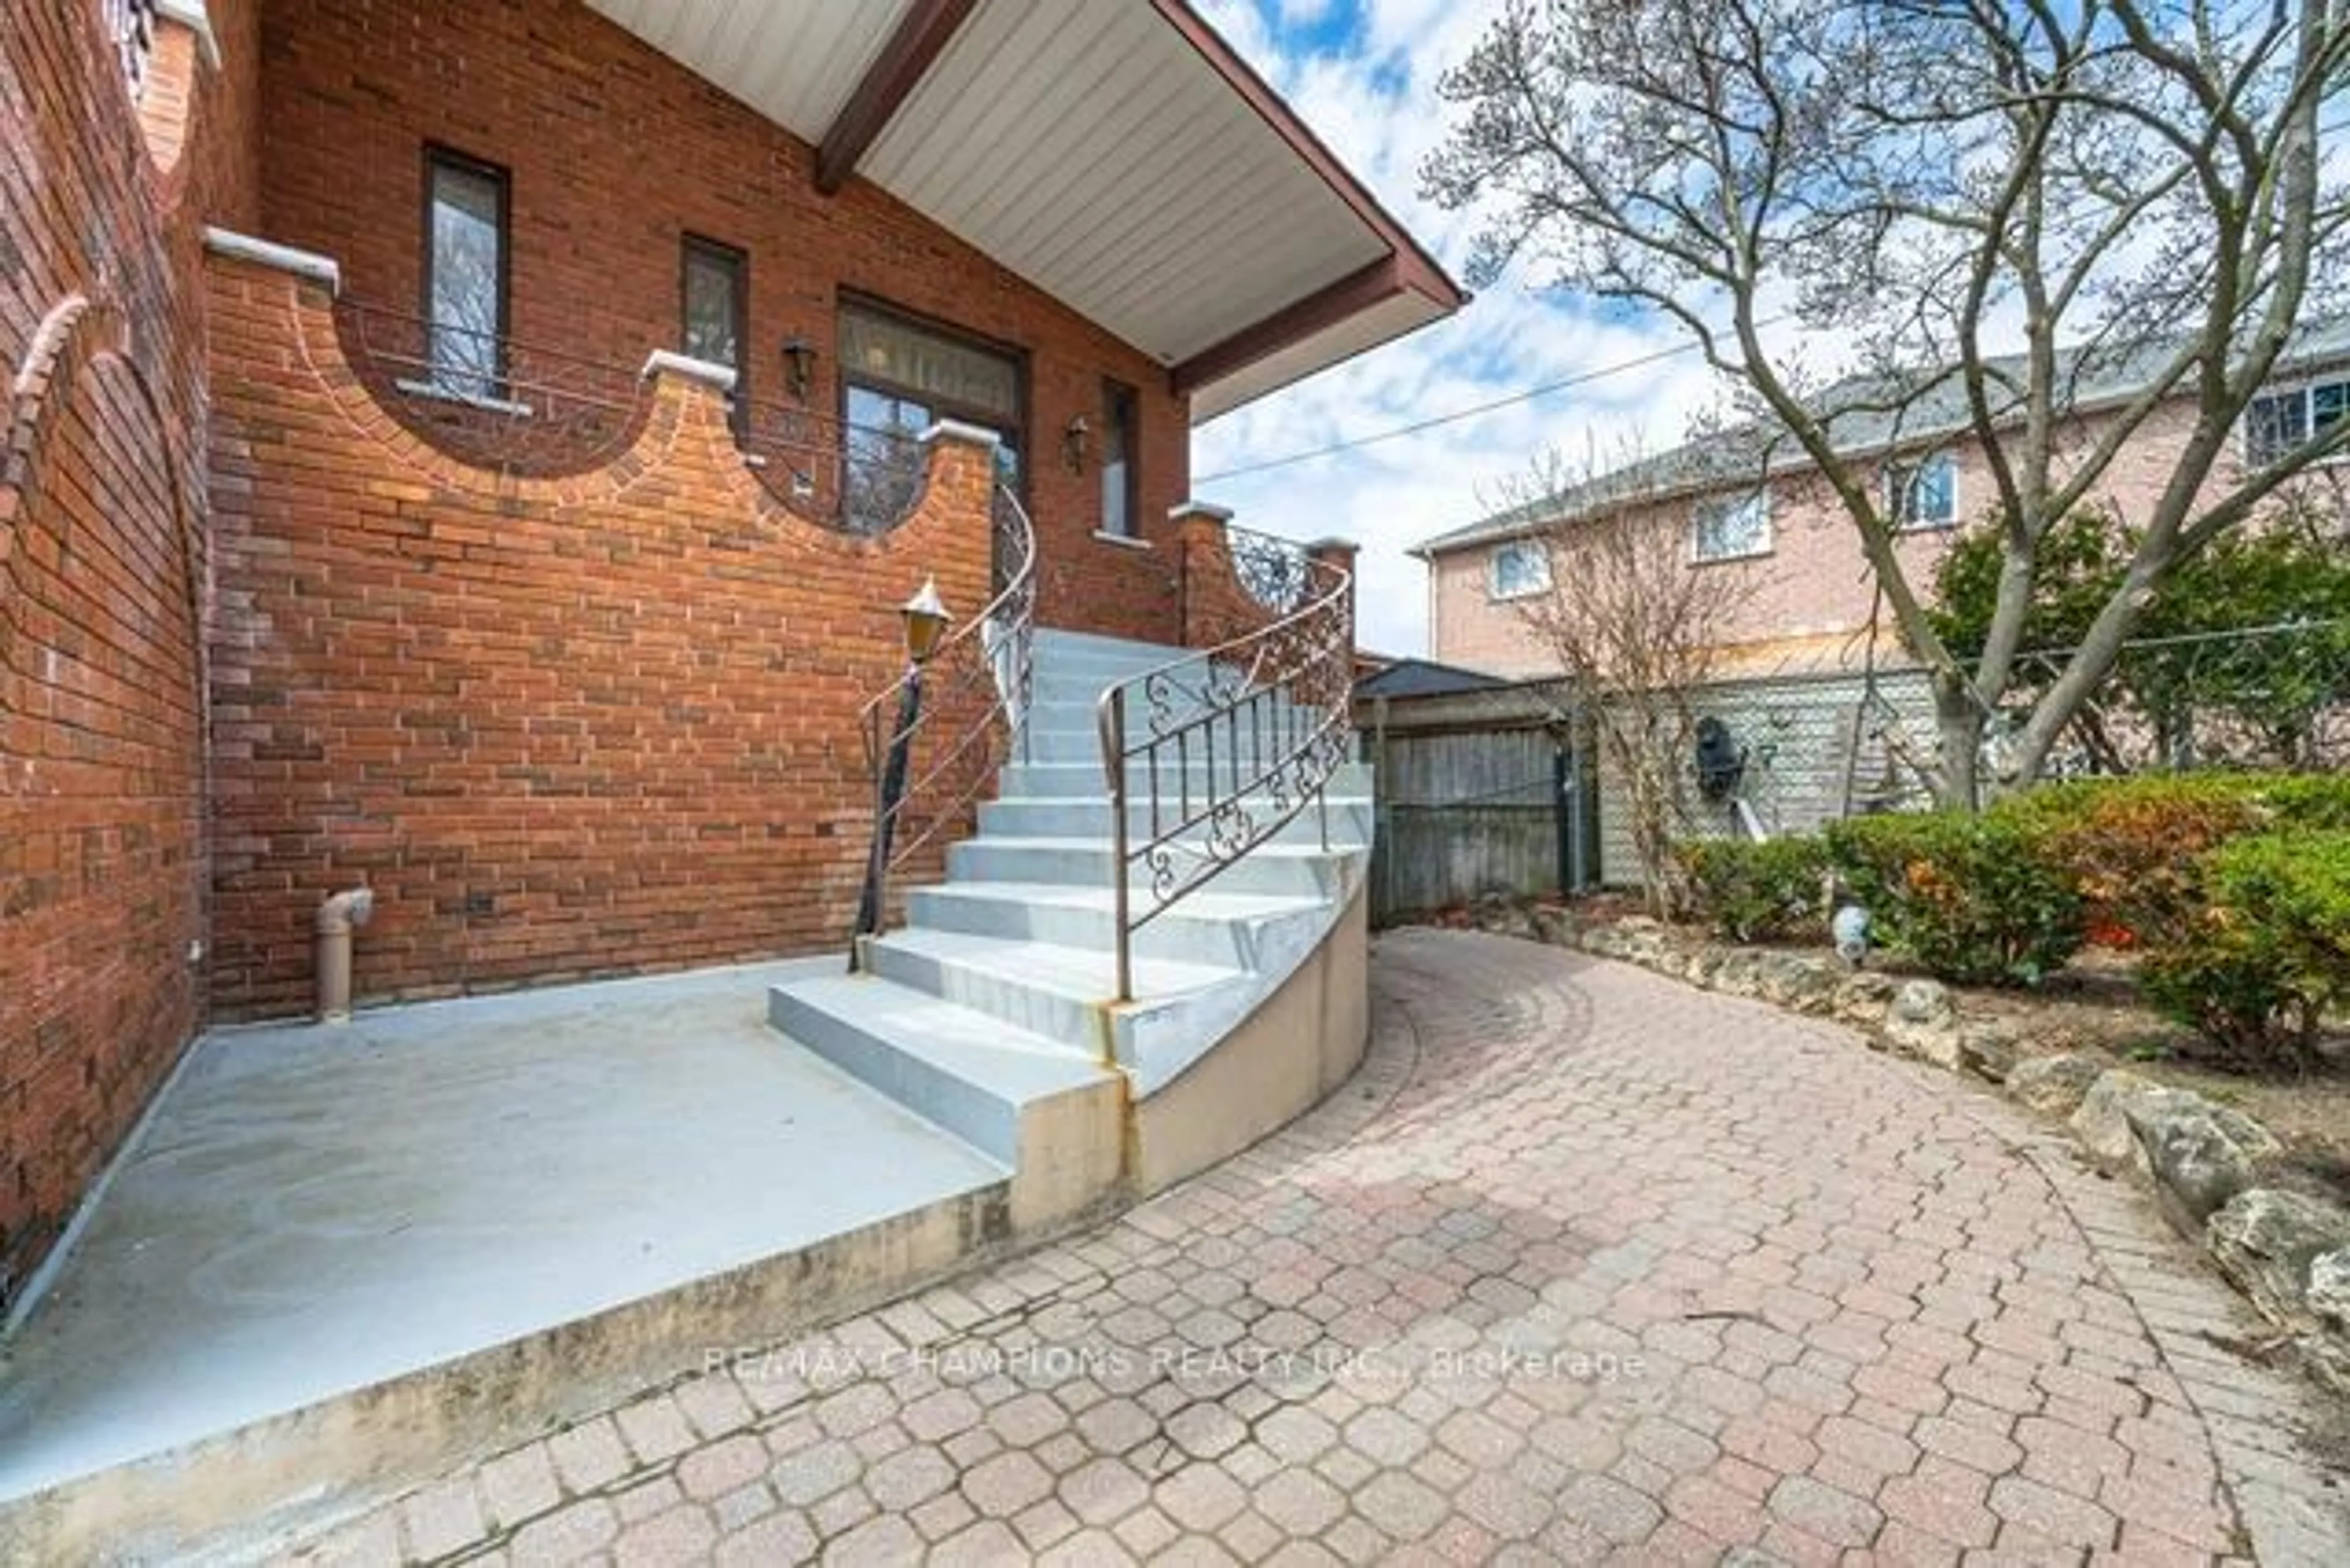 Home with brick exterior material for 10 Larchmere Ave, Toronto Ontario M9L 2N1